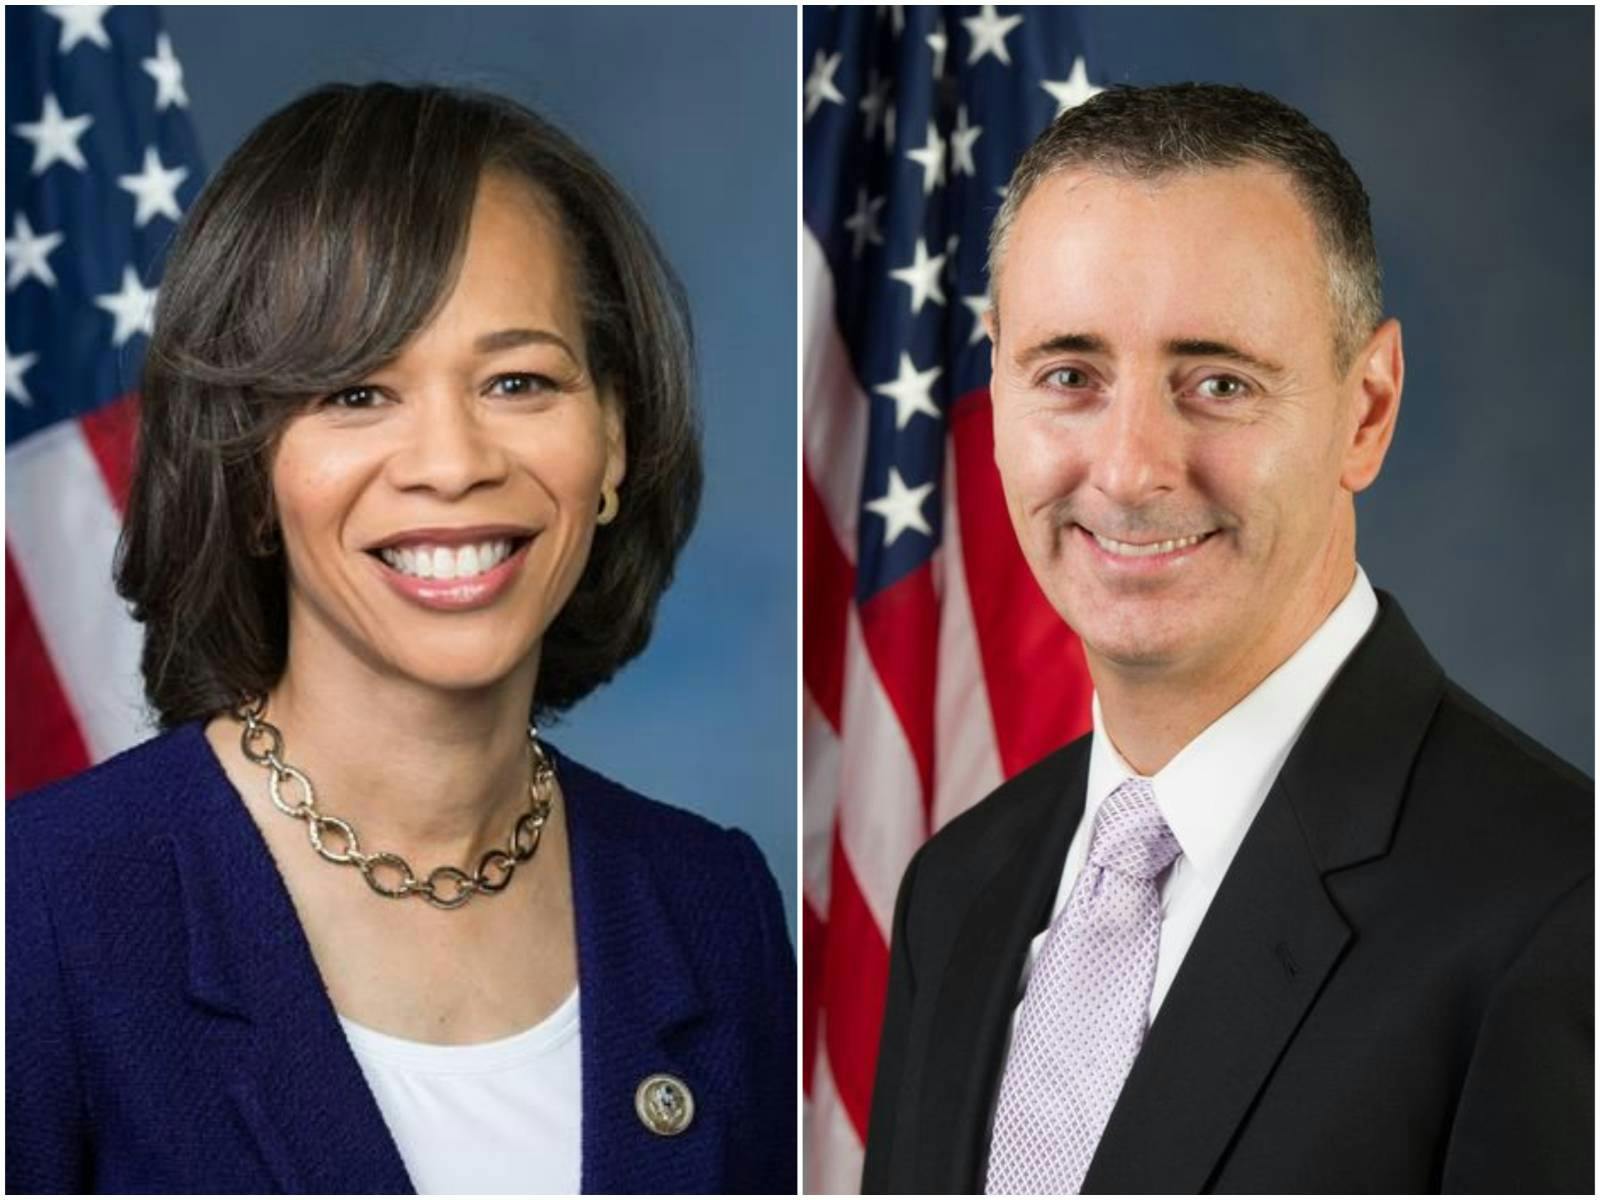 U.S. Reps. Lisa Blunt Rochester, D-Del., and Brian Fitzpatrick, R-Pa., have sponsored a bill to provide grants to address the youth mental health crisis. (Photos: U.S. House of Representatives)